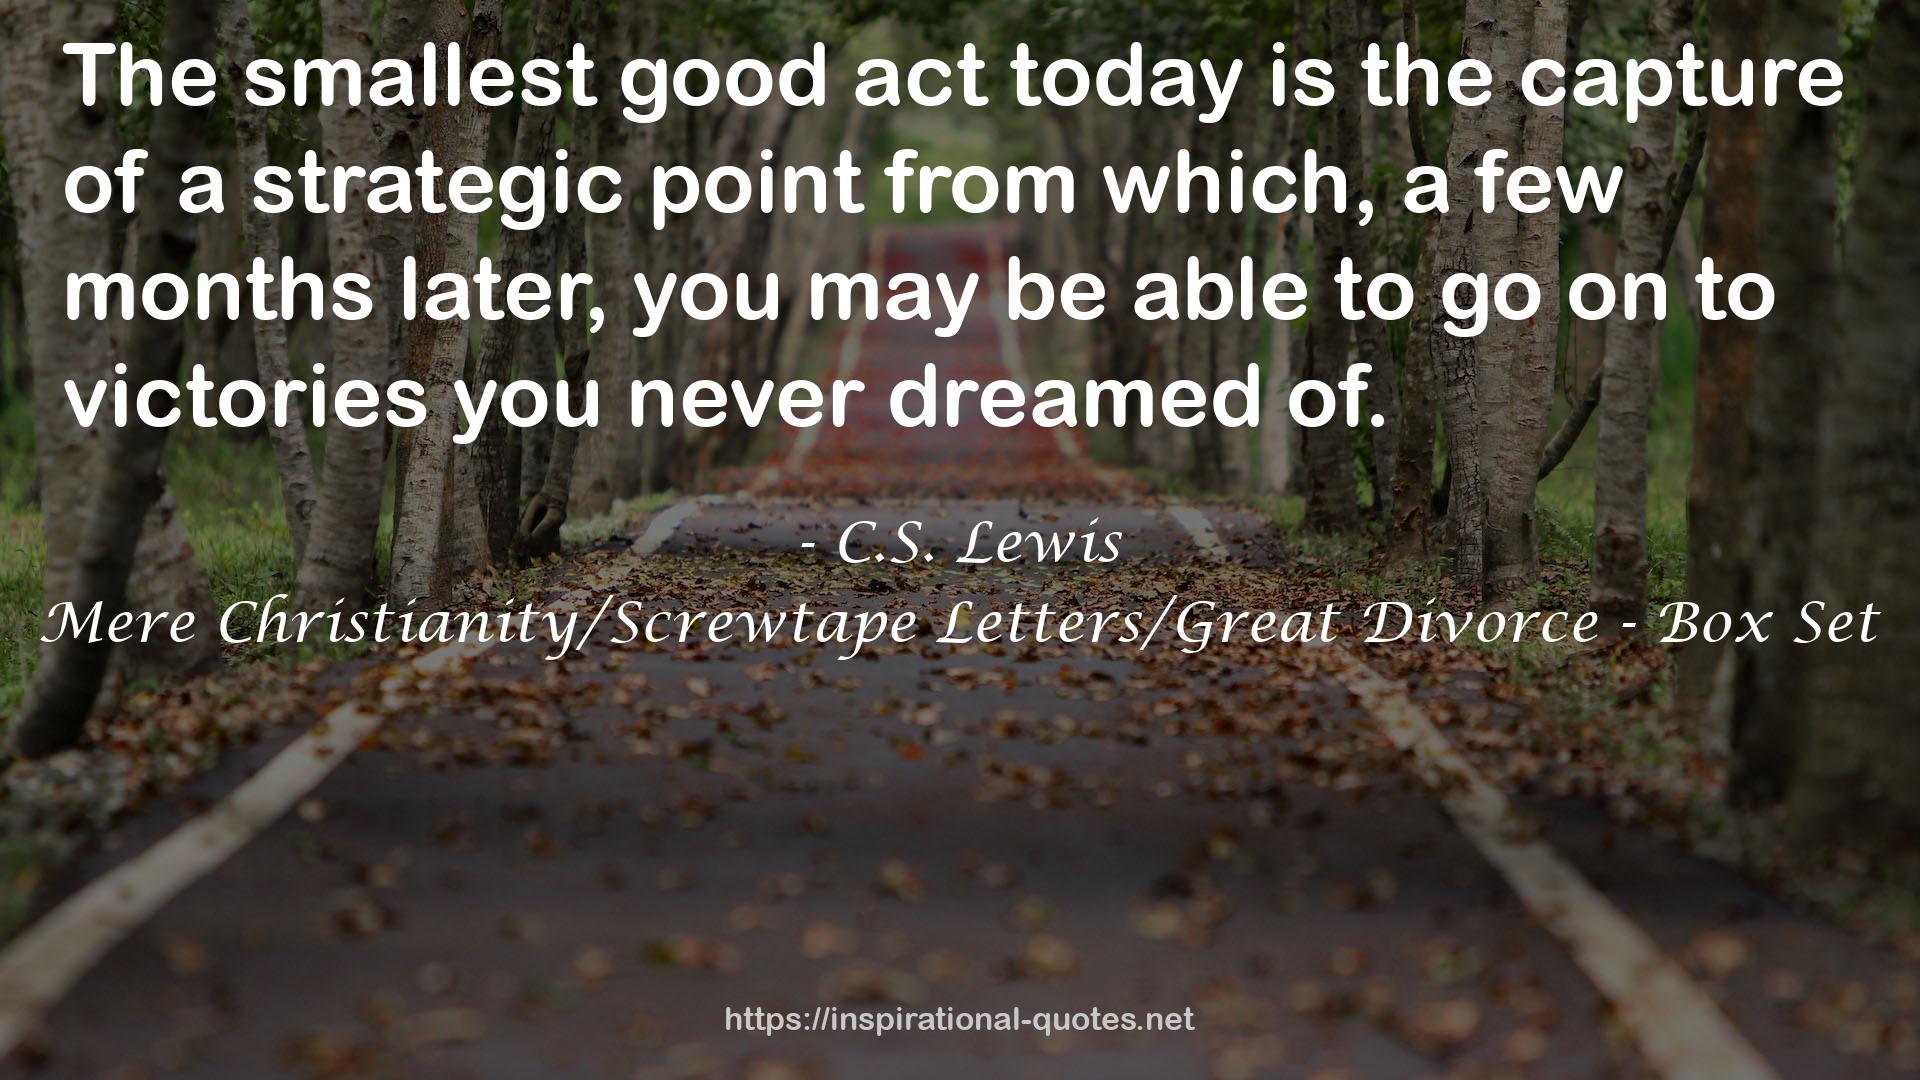 Mere Christianity/Screwtape Letters/Great Divorce - Box Set QUOTES